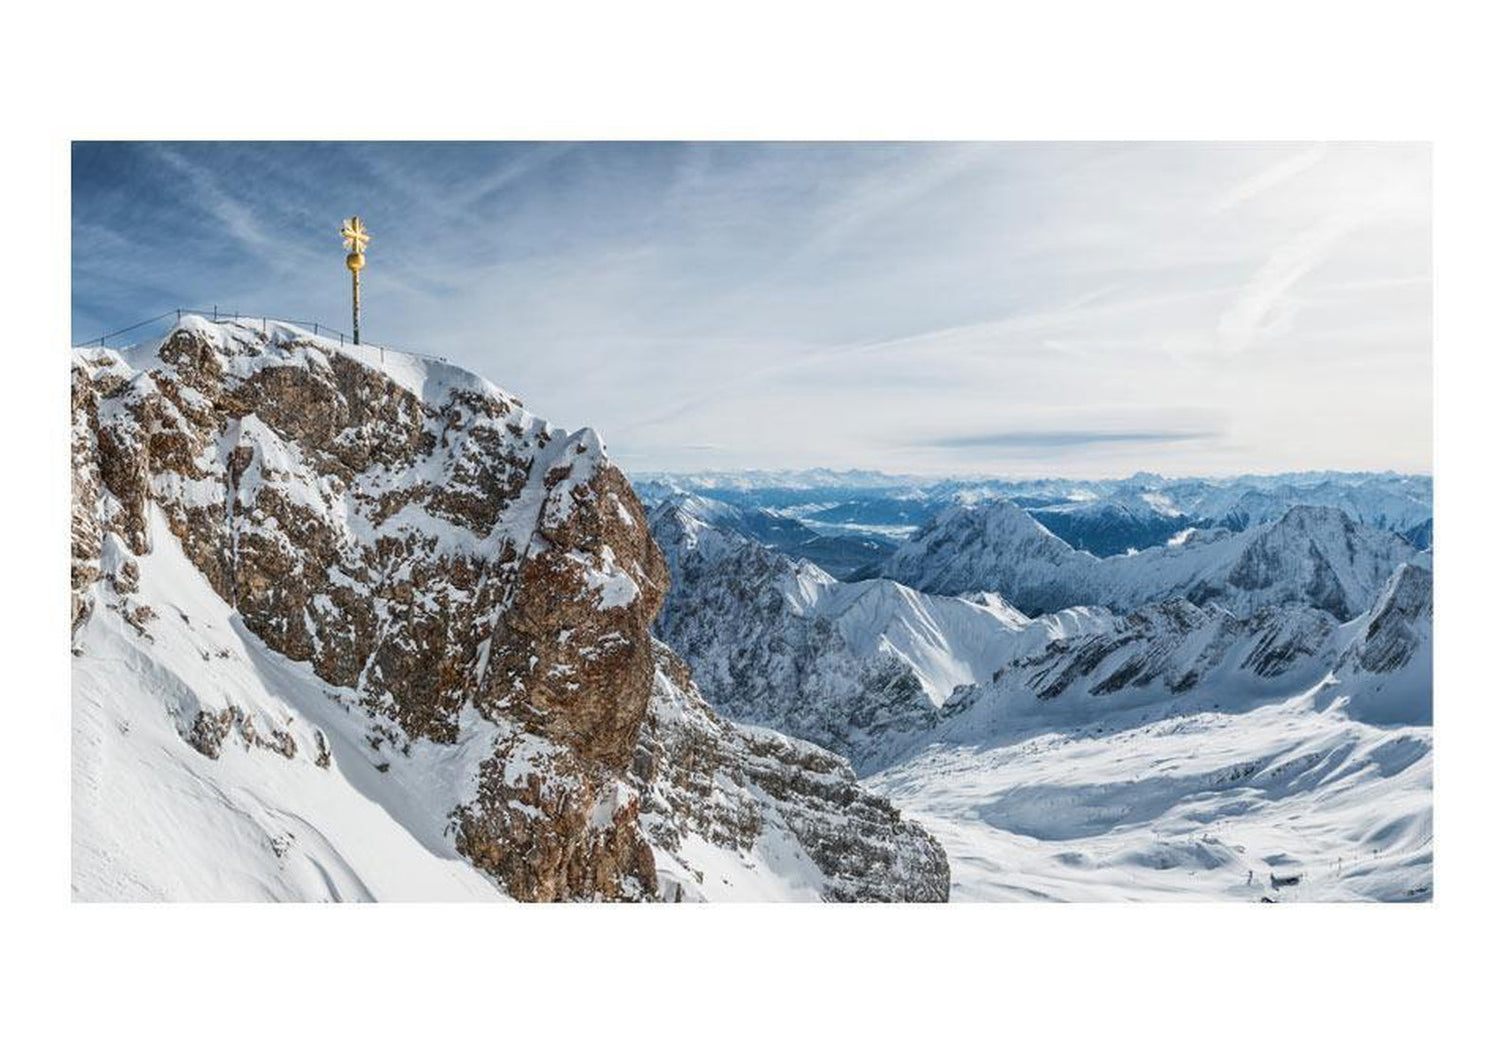 Peel and stick wall mural - Winter in Zugspitze-TipTopHomeDecor